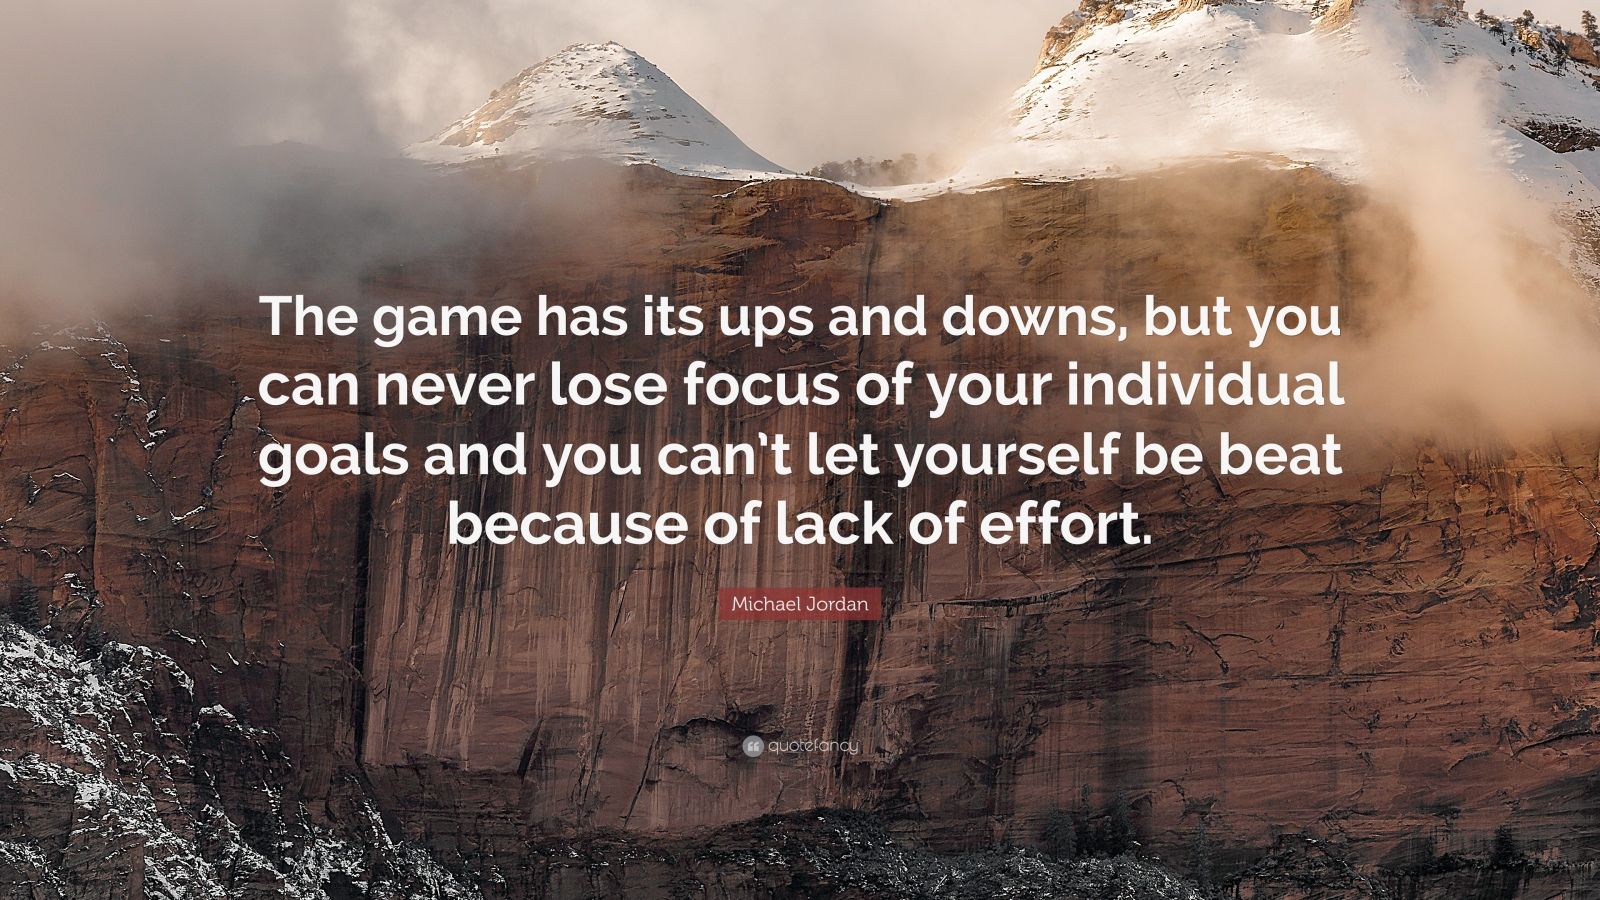 Michael Jordan Quote: “The game has its ups and downs, but you can